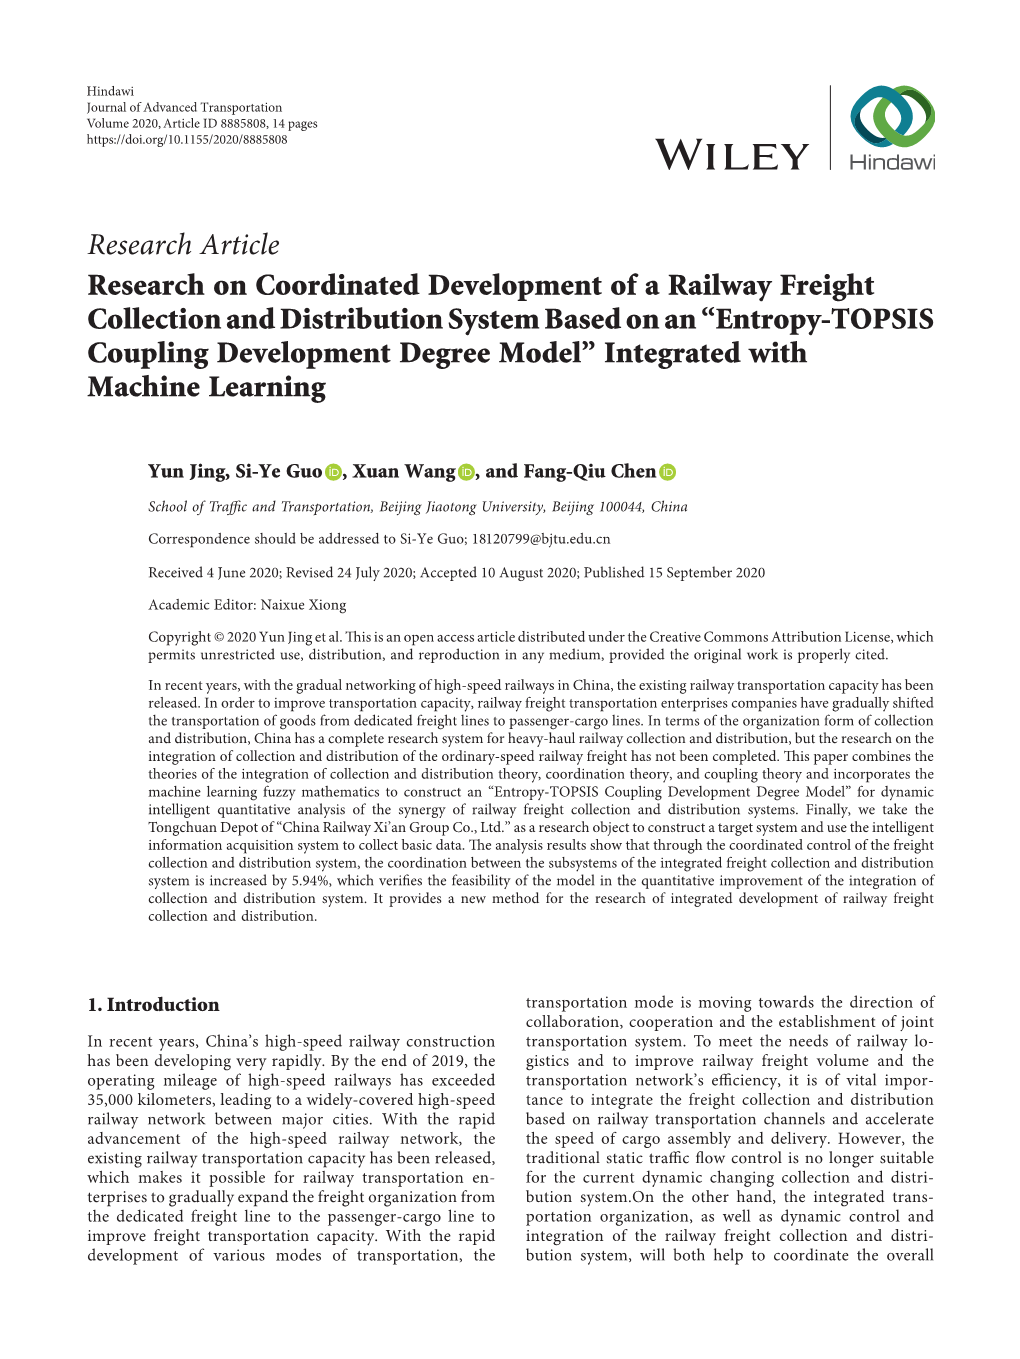 Research on Coordinated Development of a Railway Freight Collection and Distribution System Based on an “Entropy-TOPSIS Coupling Development Degree Model” Integrated With